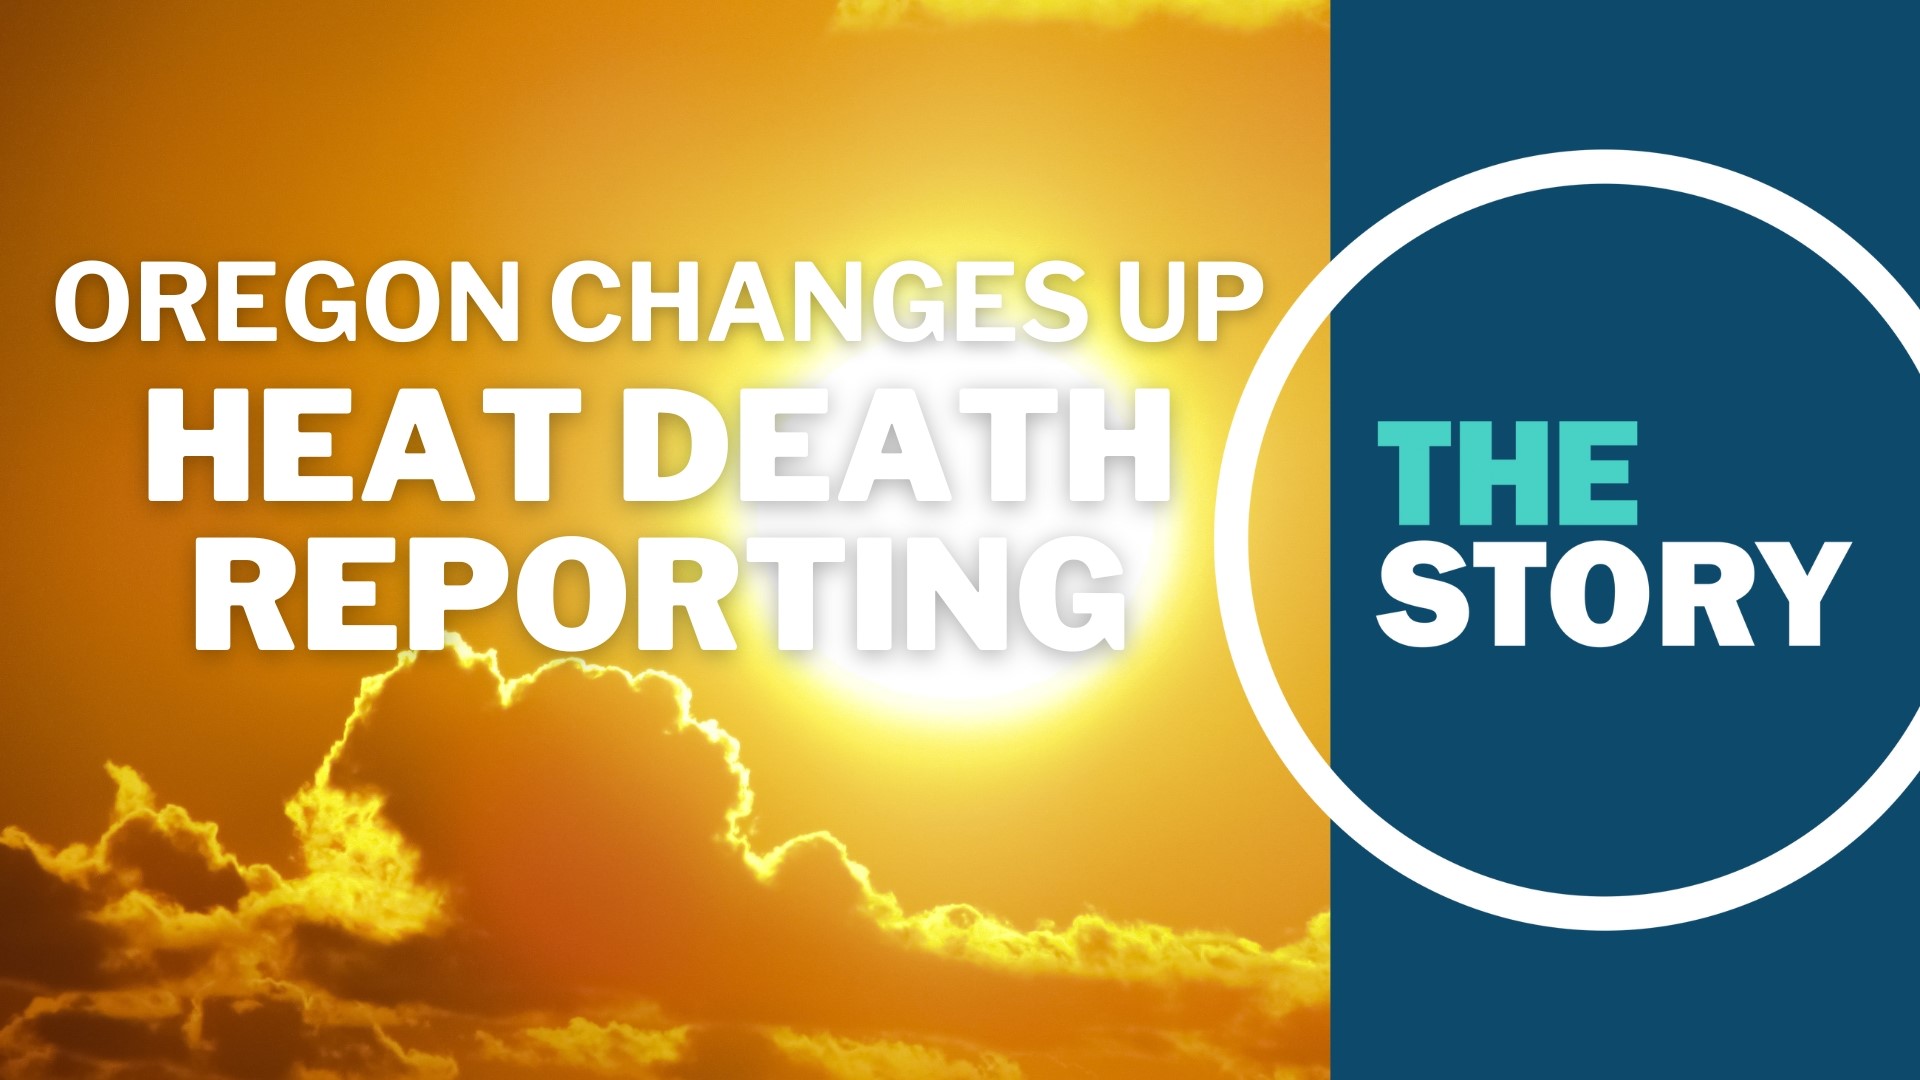 Last summer, deaths weren’t reported until days after the excessive heat. Now they are coming almost immediately. What changed?